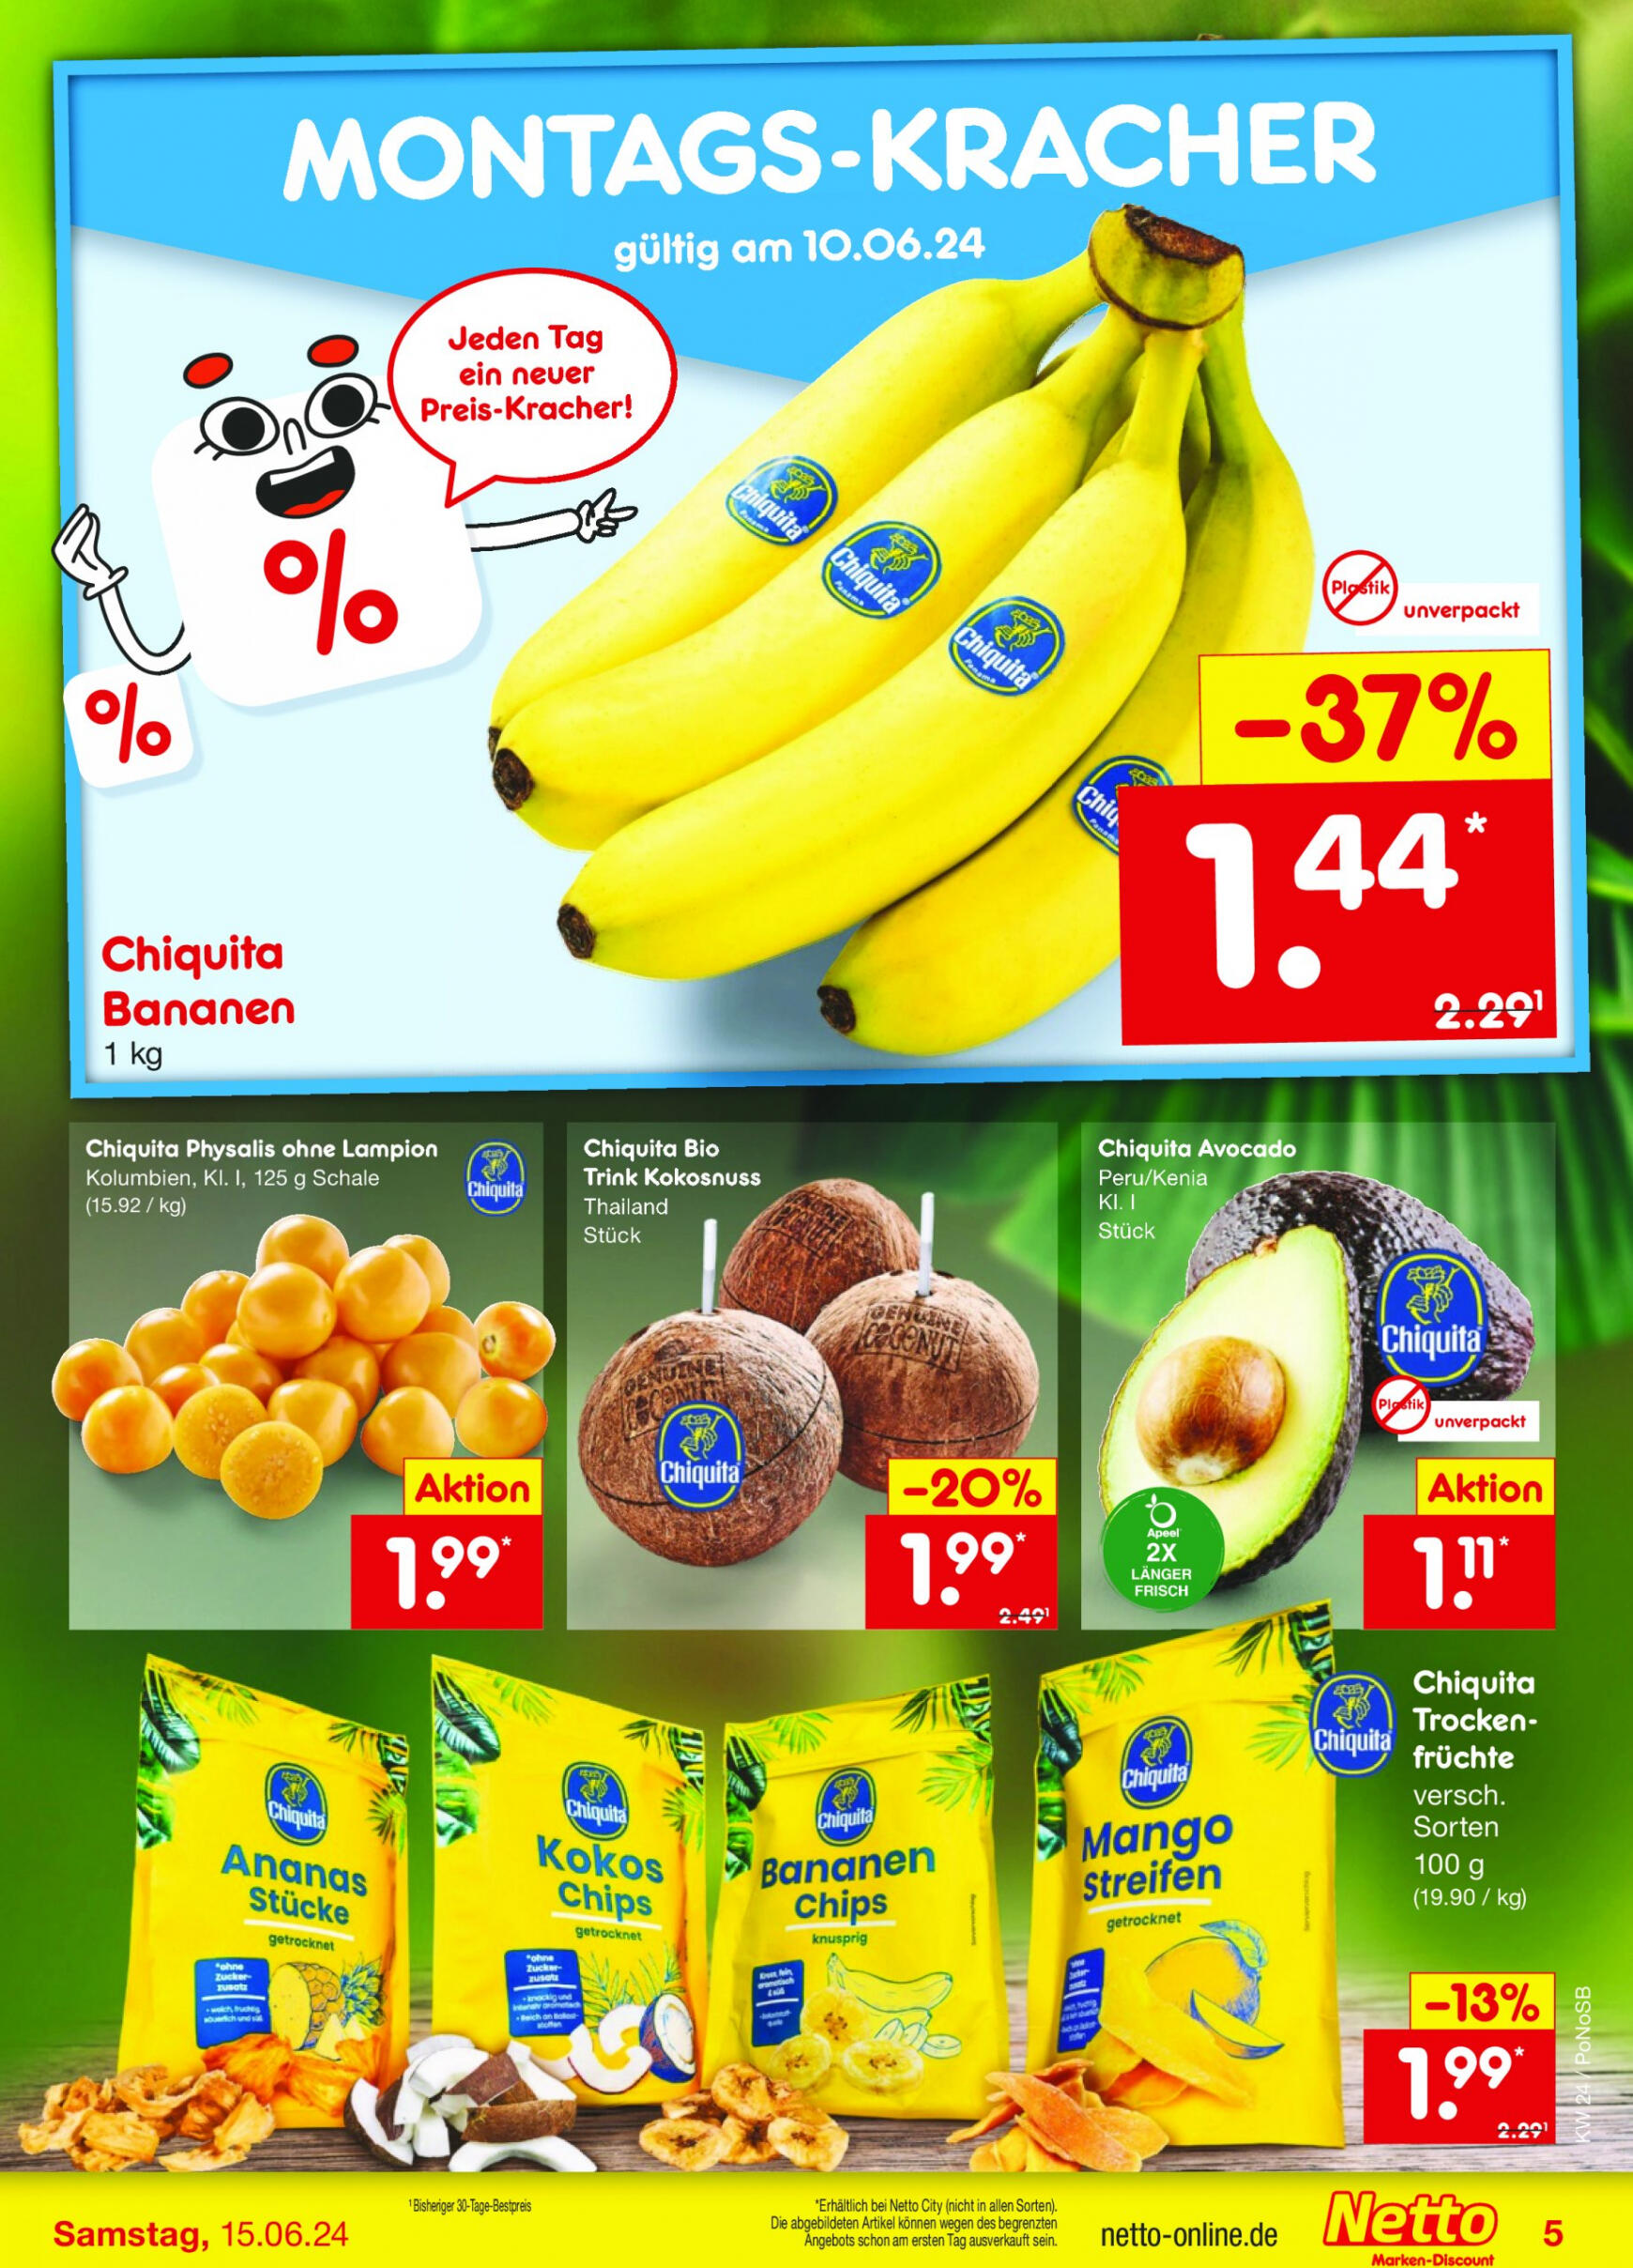 netto - Flyer Netto aktuell 10.06. - 15.06. - page: 7